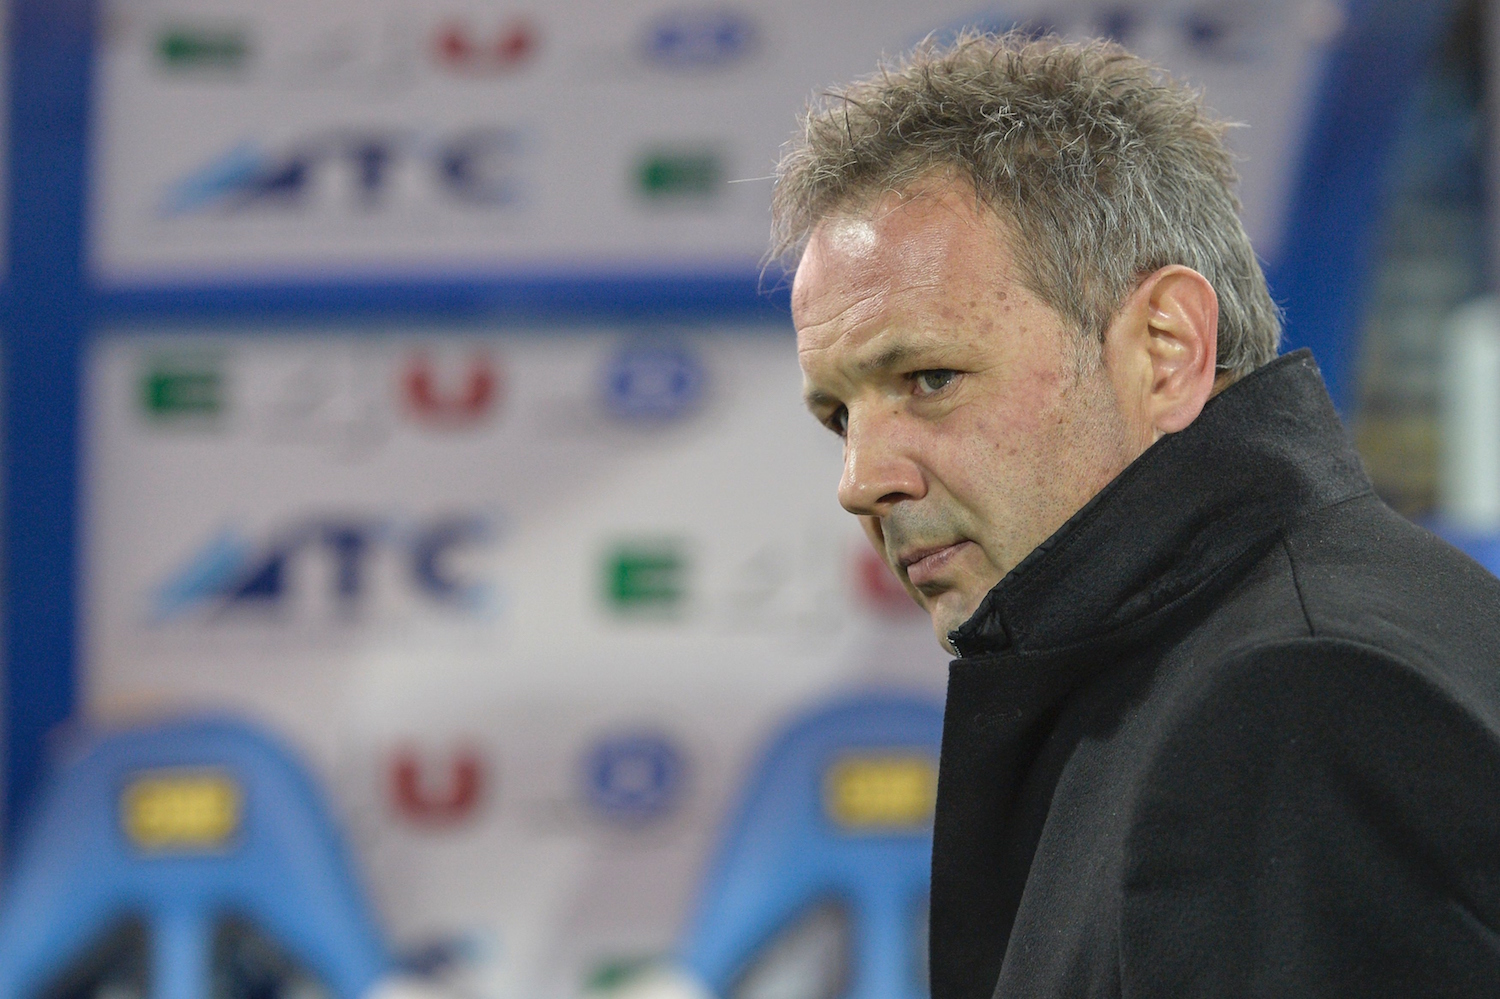 Coach Mihajlovic looks on from the sidelines. | ANDREAS SOLARO/AFP/Getty Images